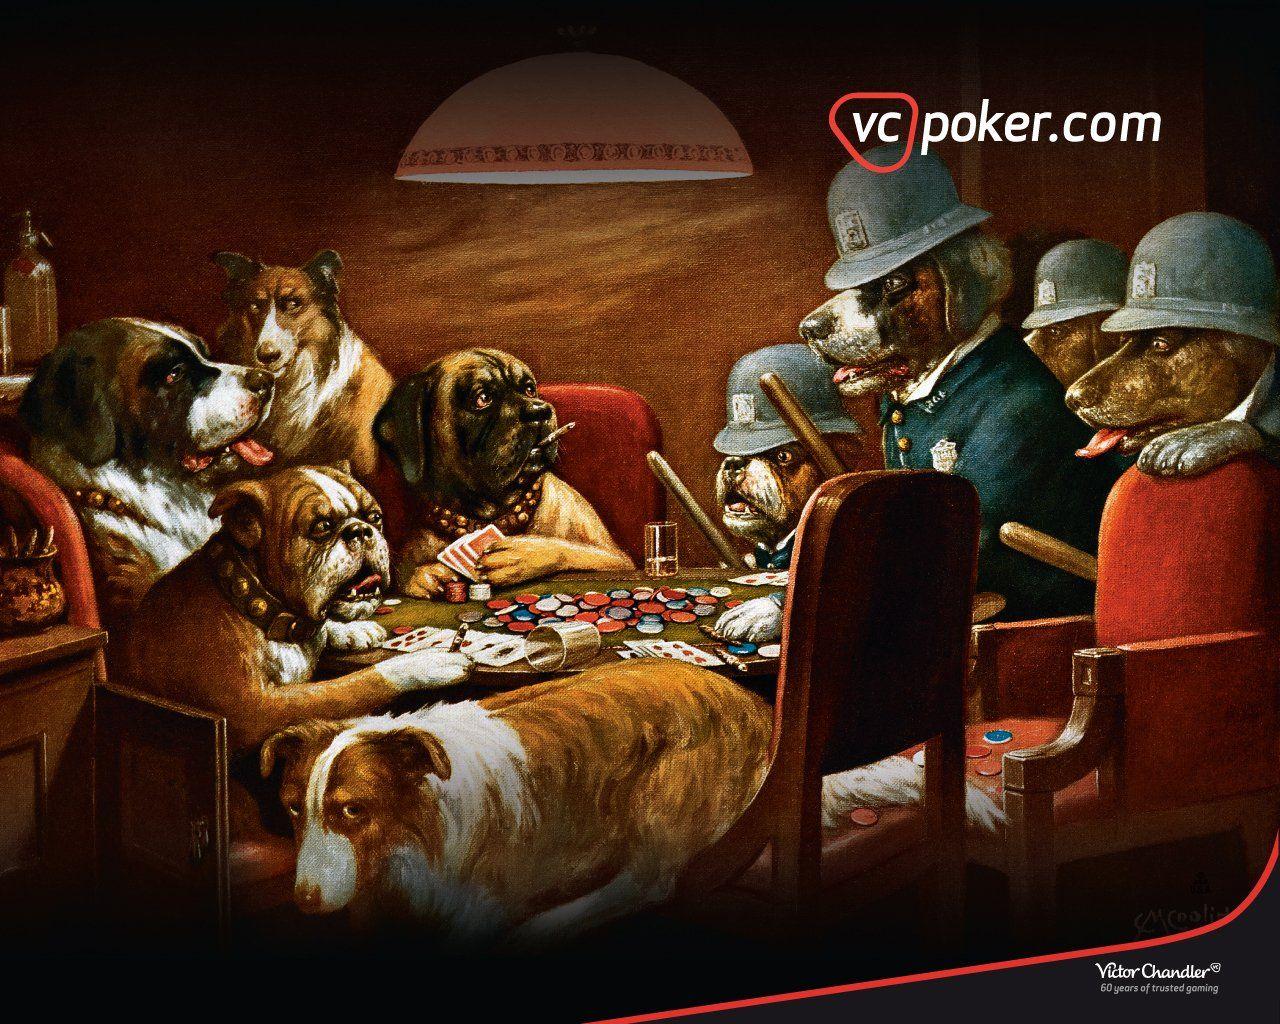 Dogs Playing Poker Wallpapers - Top Free Dogs Playing Poker Backgrounds